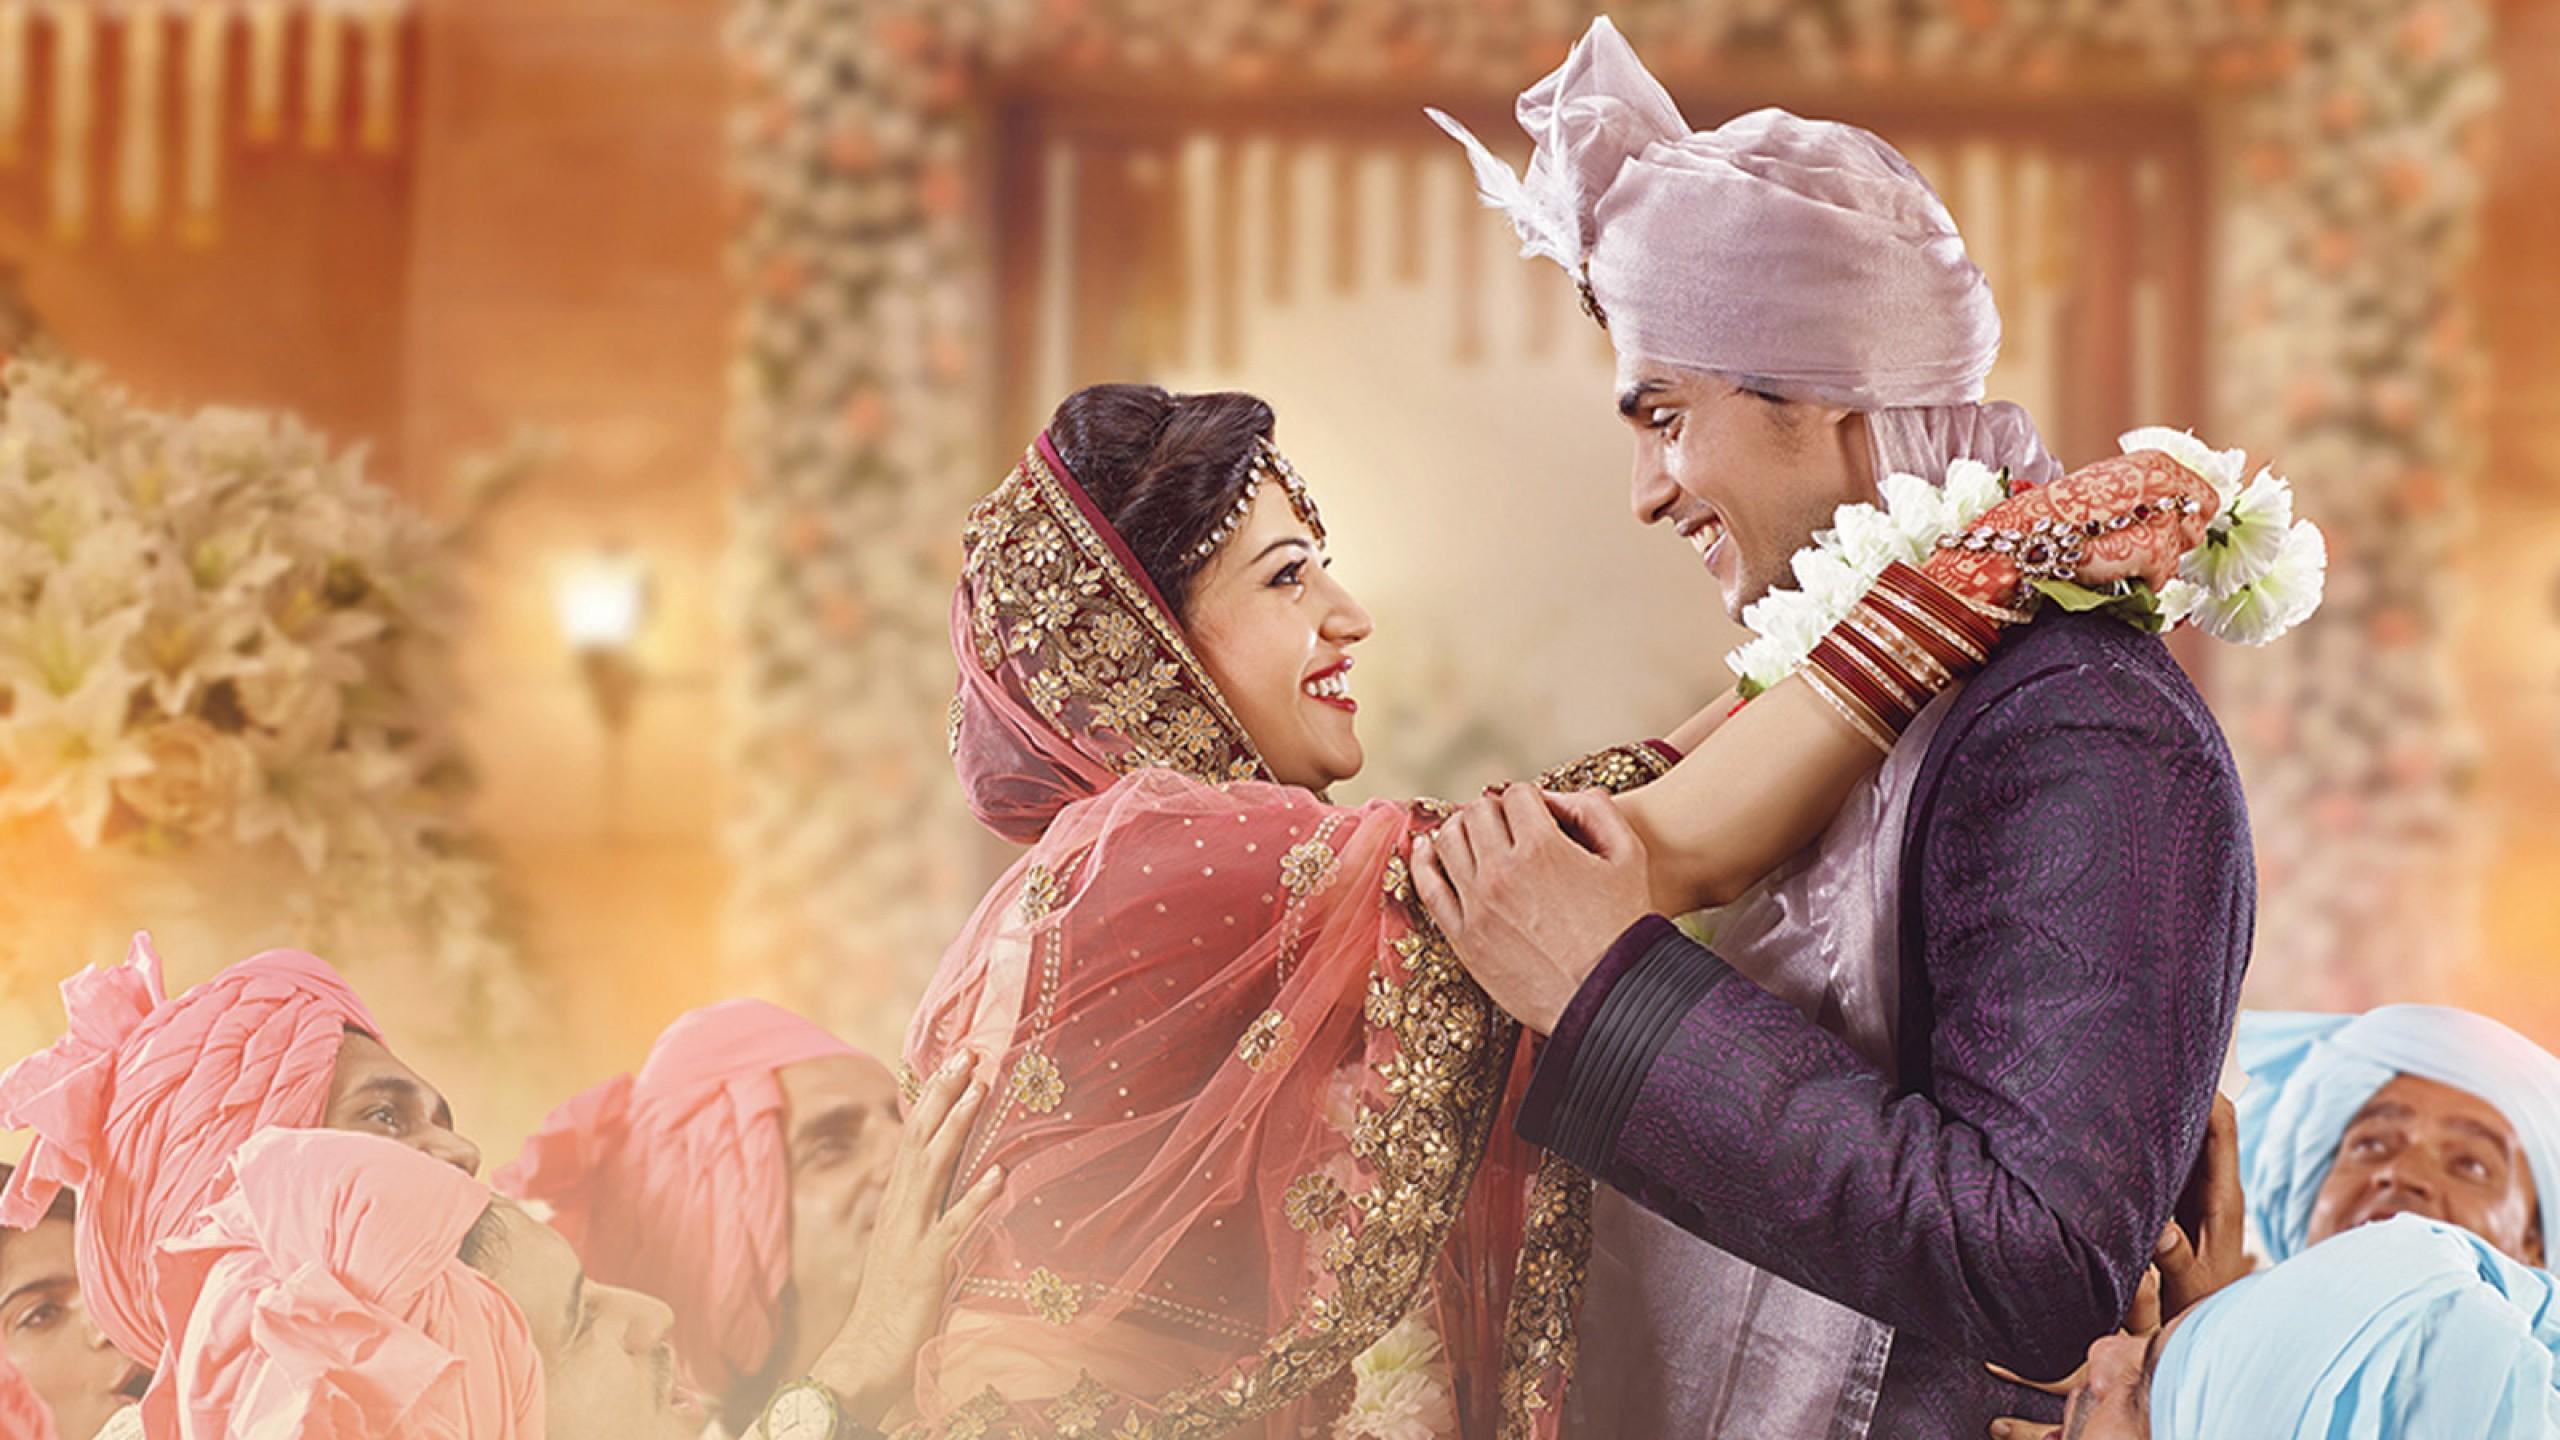 Tons of awesome Indian marriage wallpapers to download for free. 